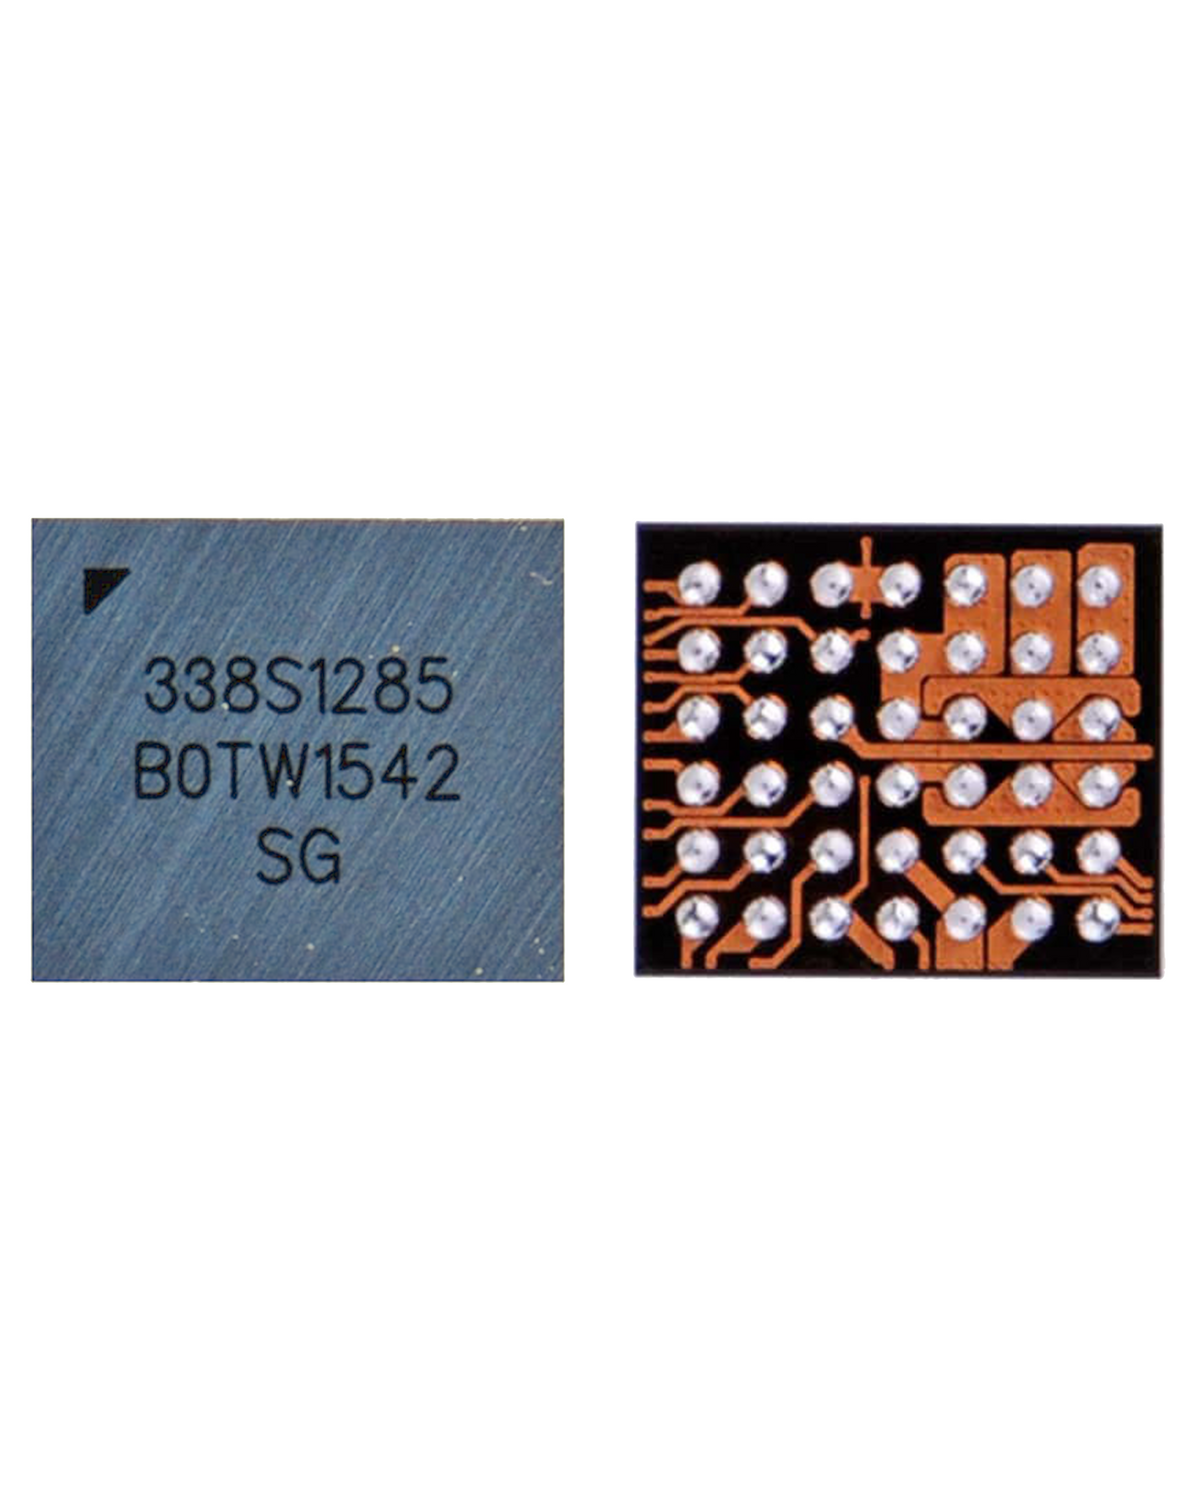 SMALL AUDIO IC COMPATIBLE WITH IPHONE SE (2016) / IPHONE 6S / IPHONE 6S PLUS (U3700 / U3800 / 338S1285: 42 PINS)